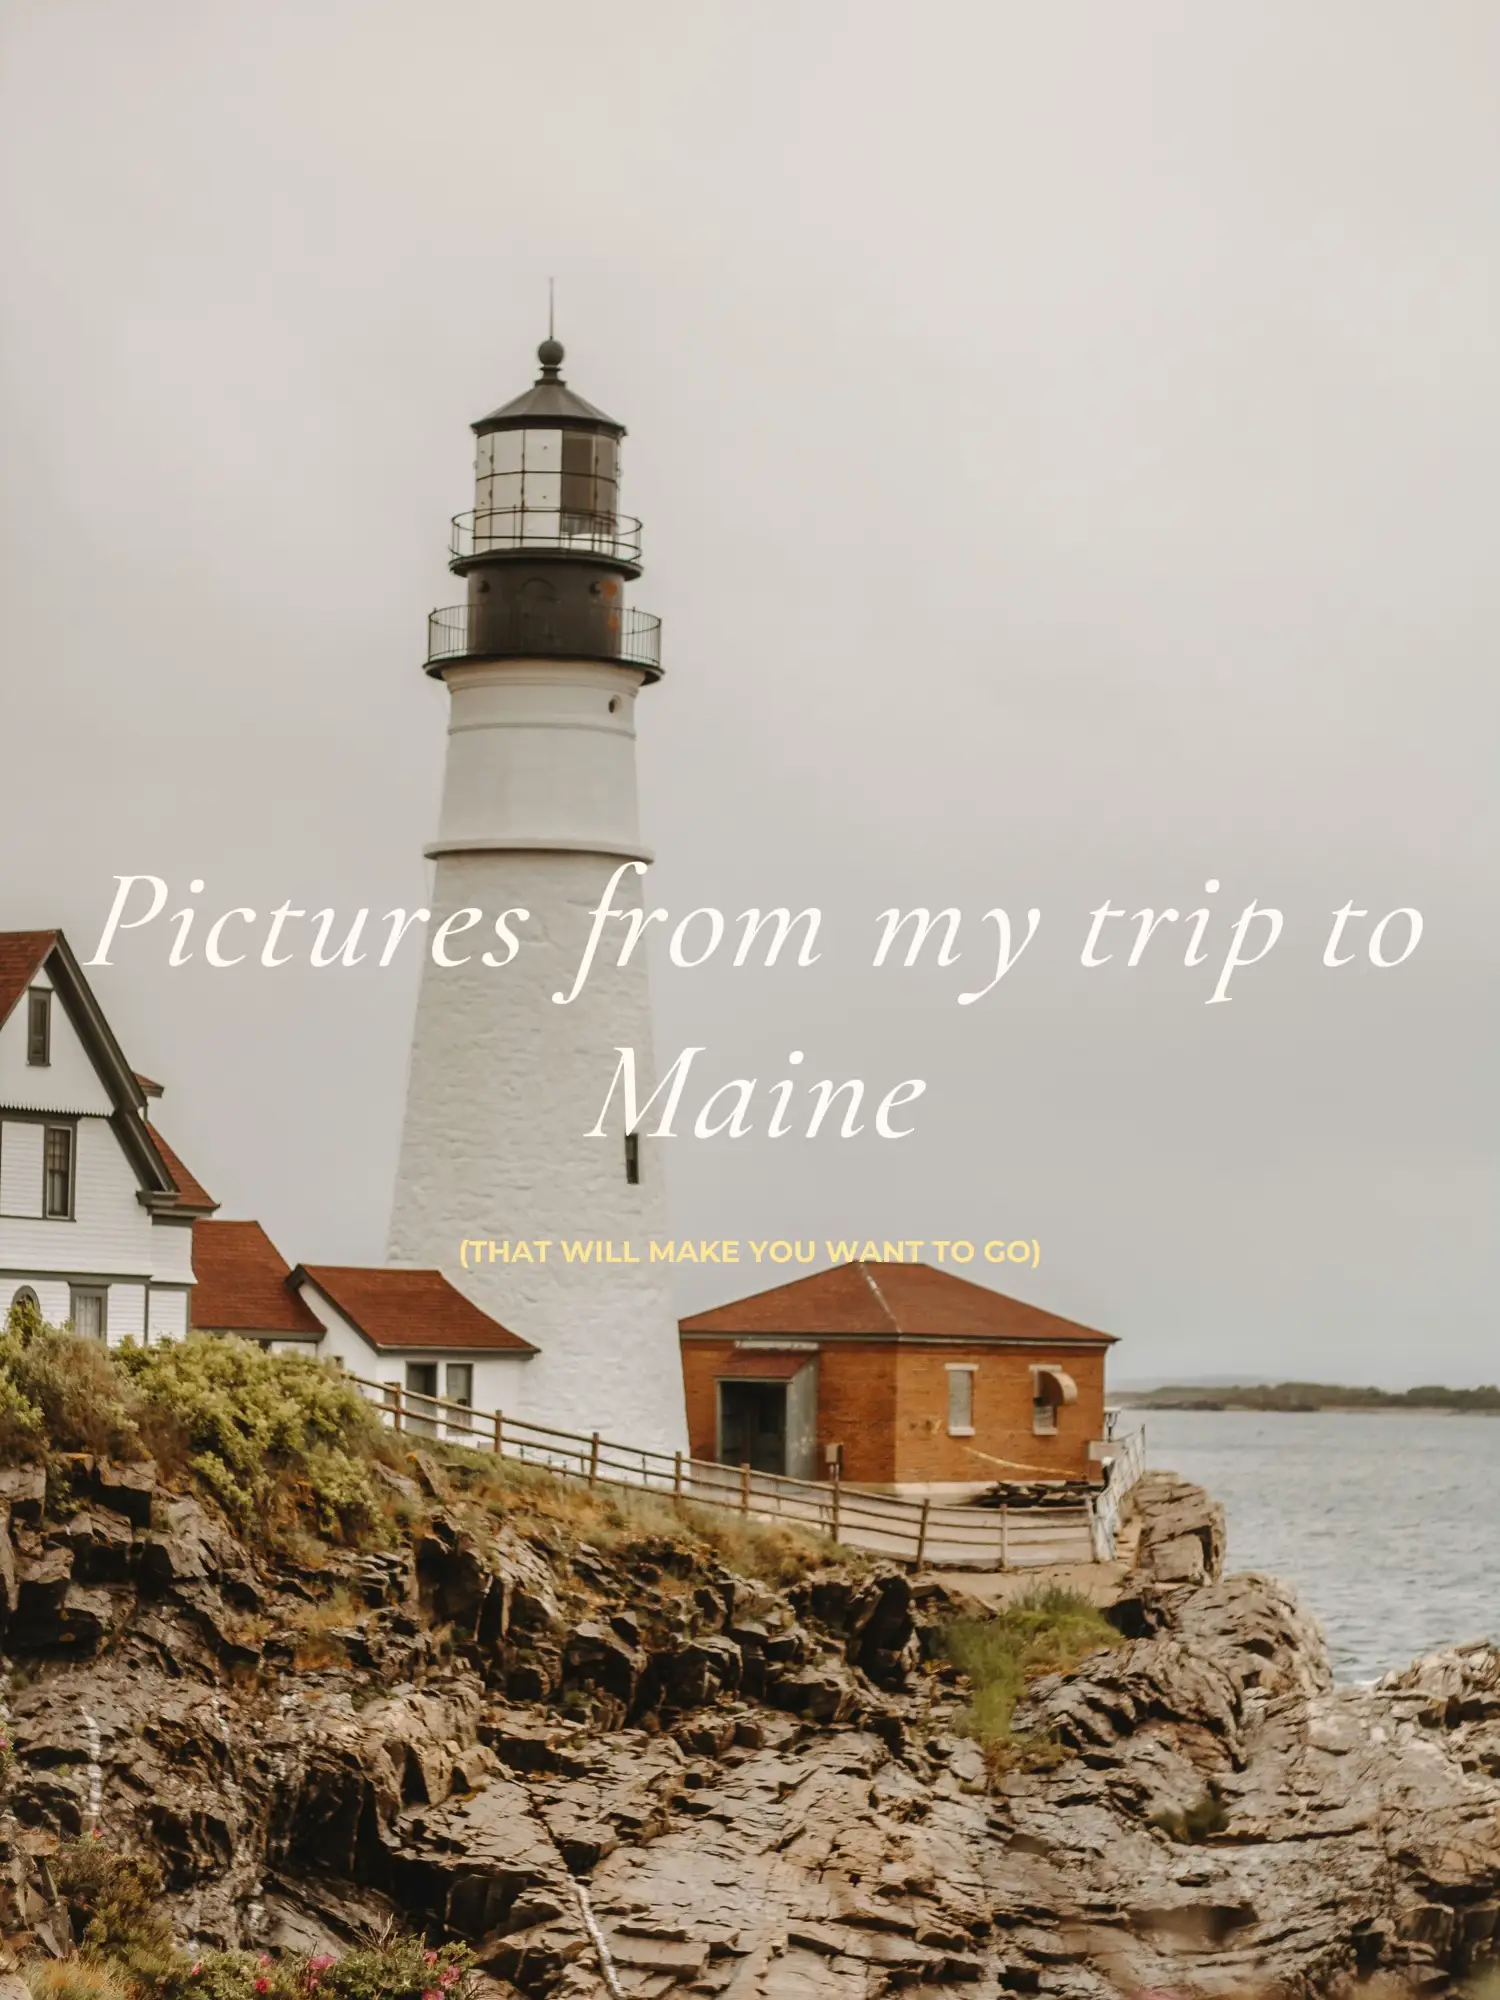 My Travel Scrapbook 🗺️, Gallery posted by Izzy Gauthier